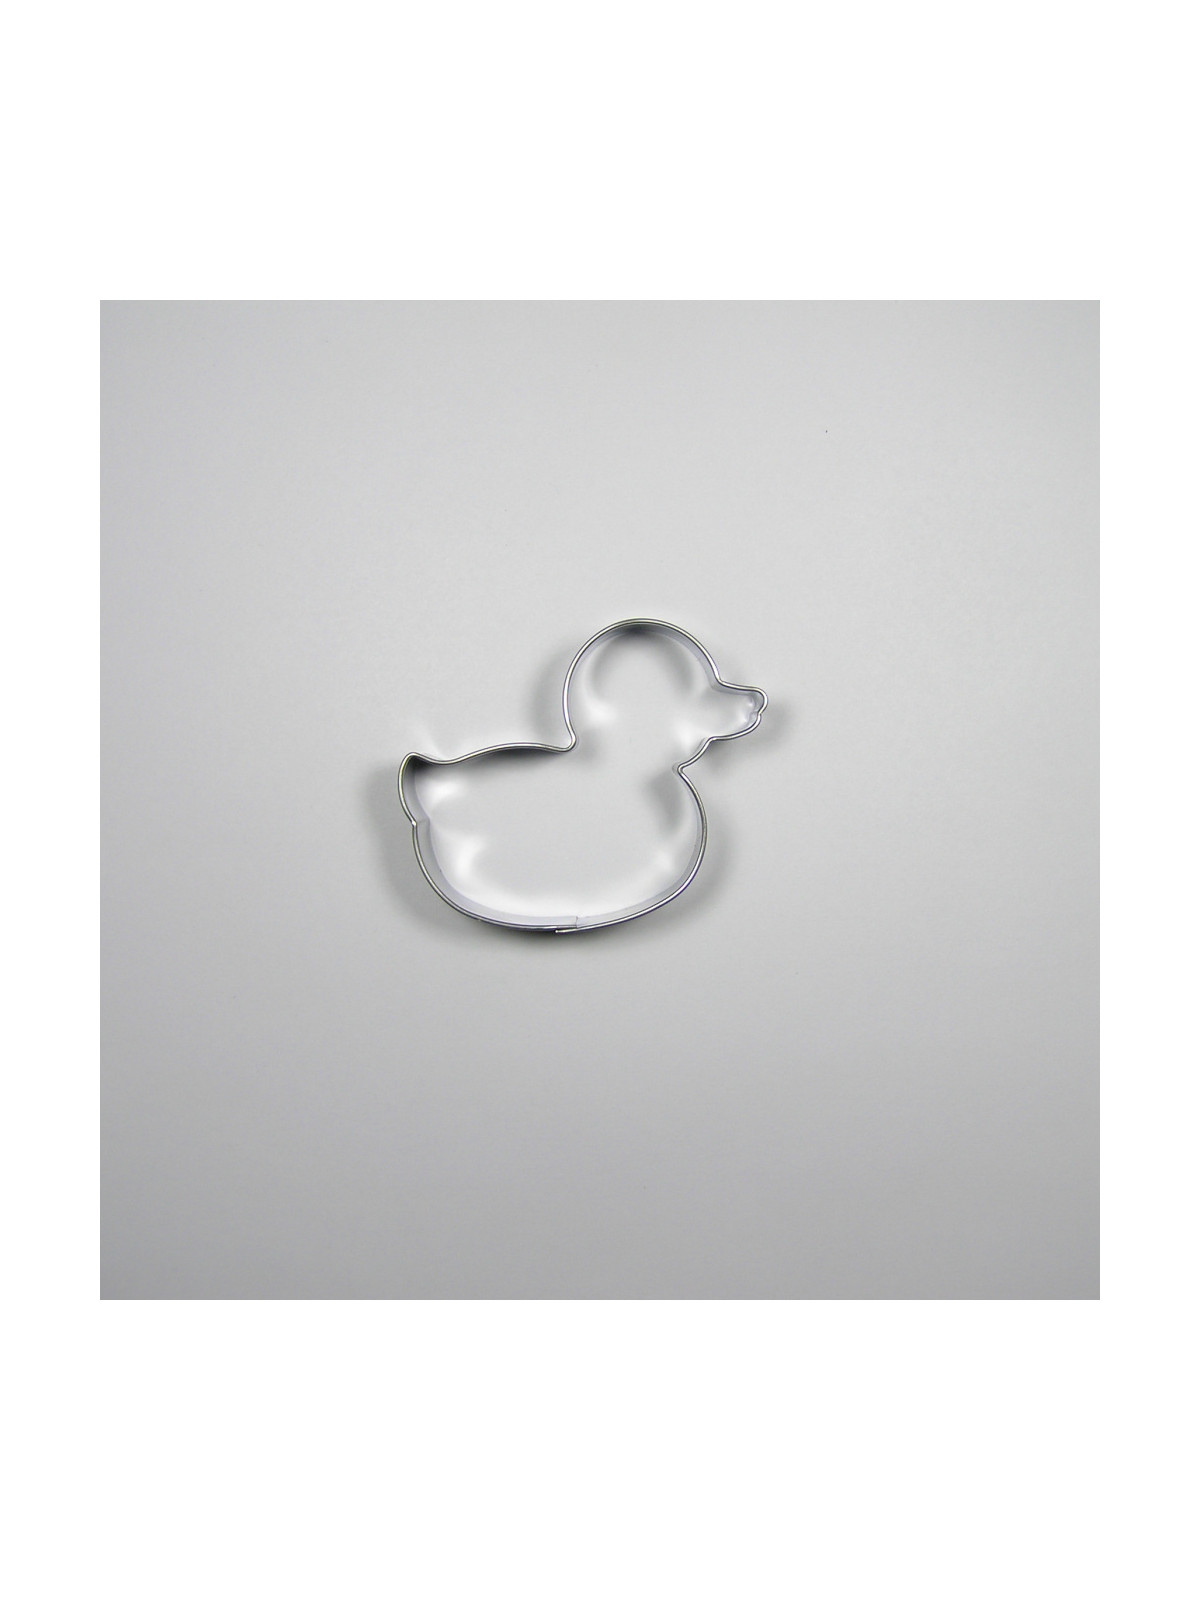 Stainless steel cutter - duckling 6 cm